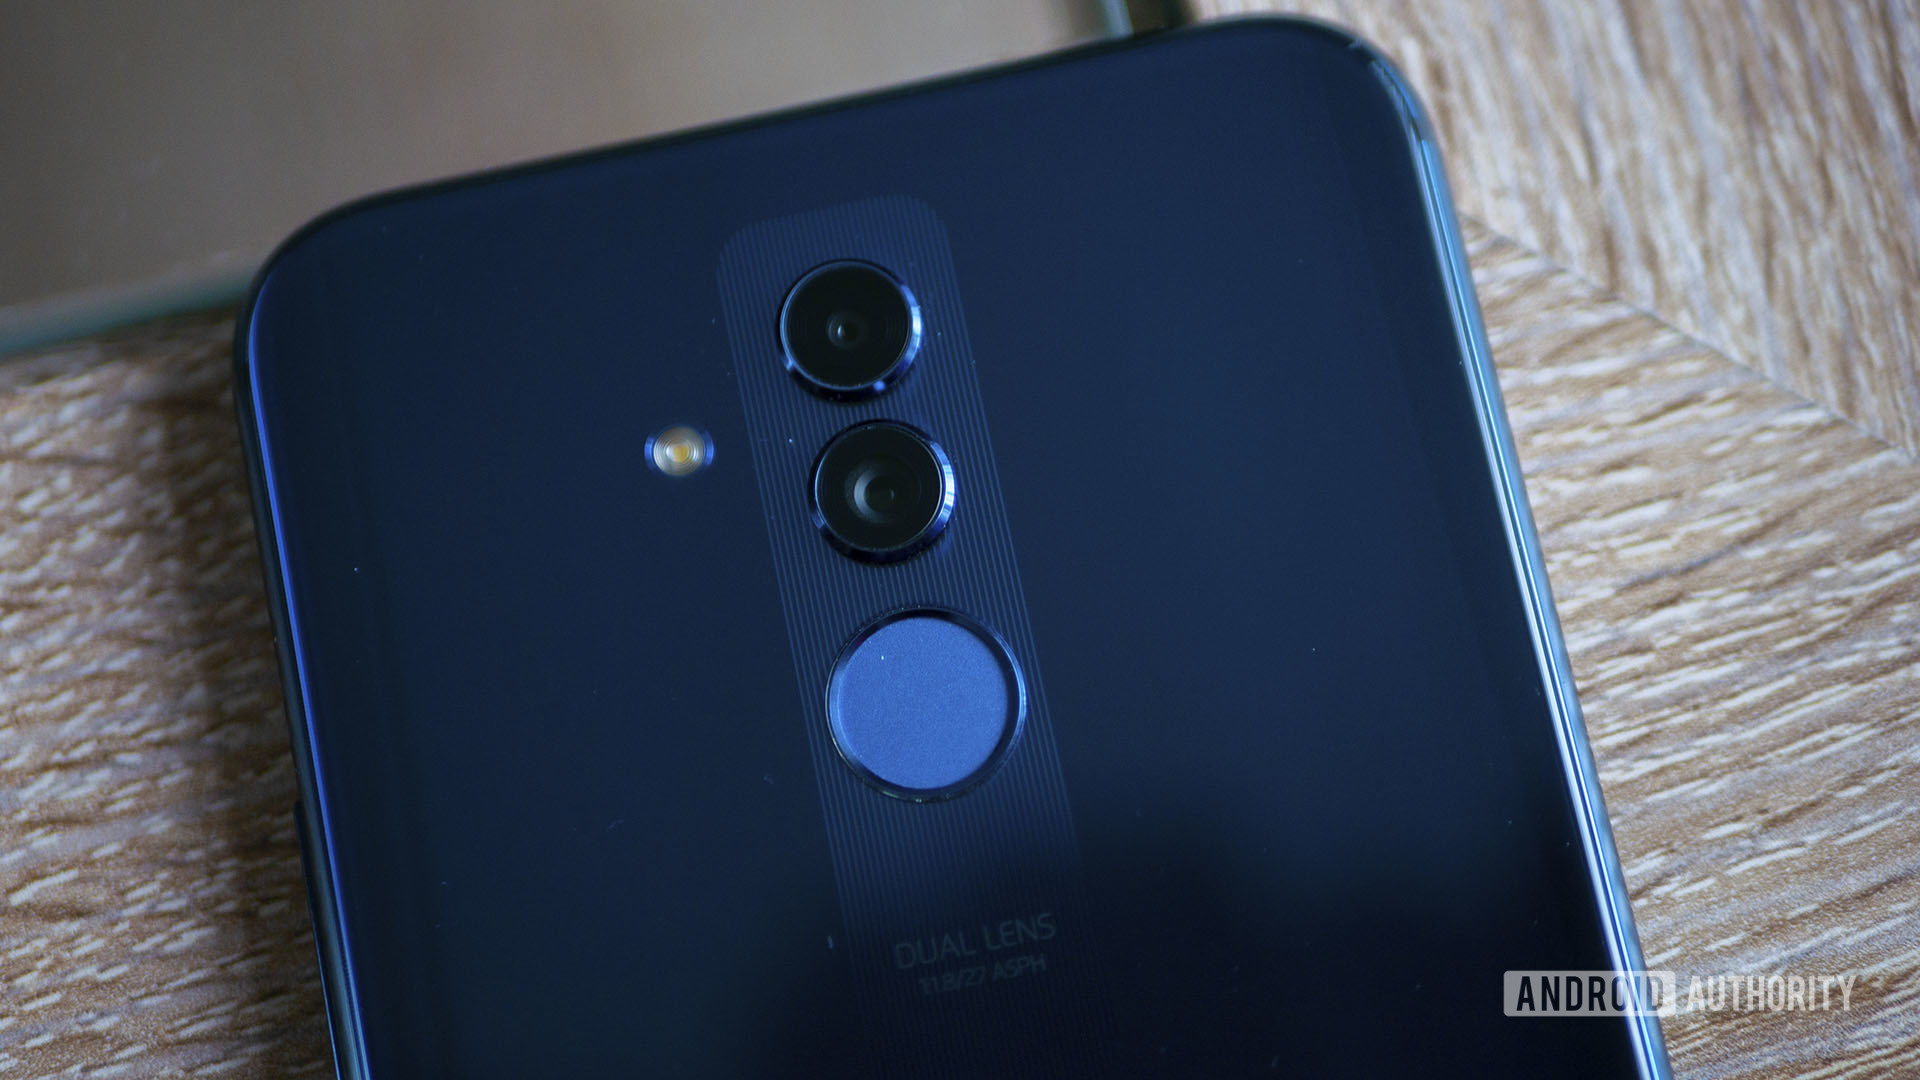 Direct federatie een keer HUAWEI Mate 20 Lite review: Not so smart - Android Authority